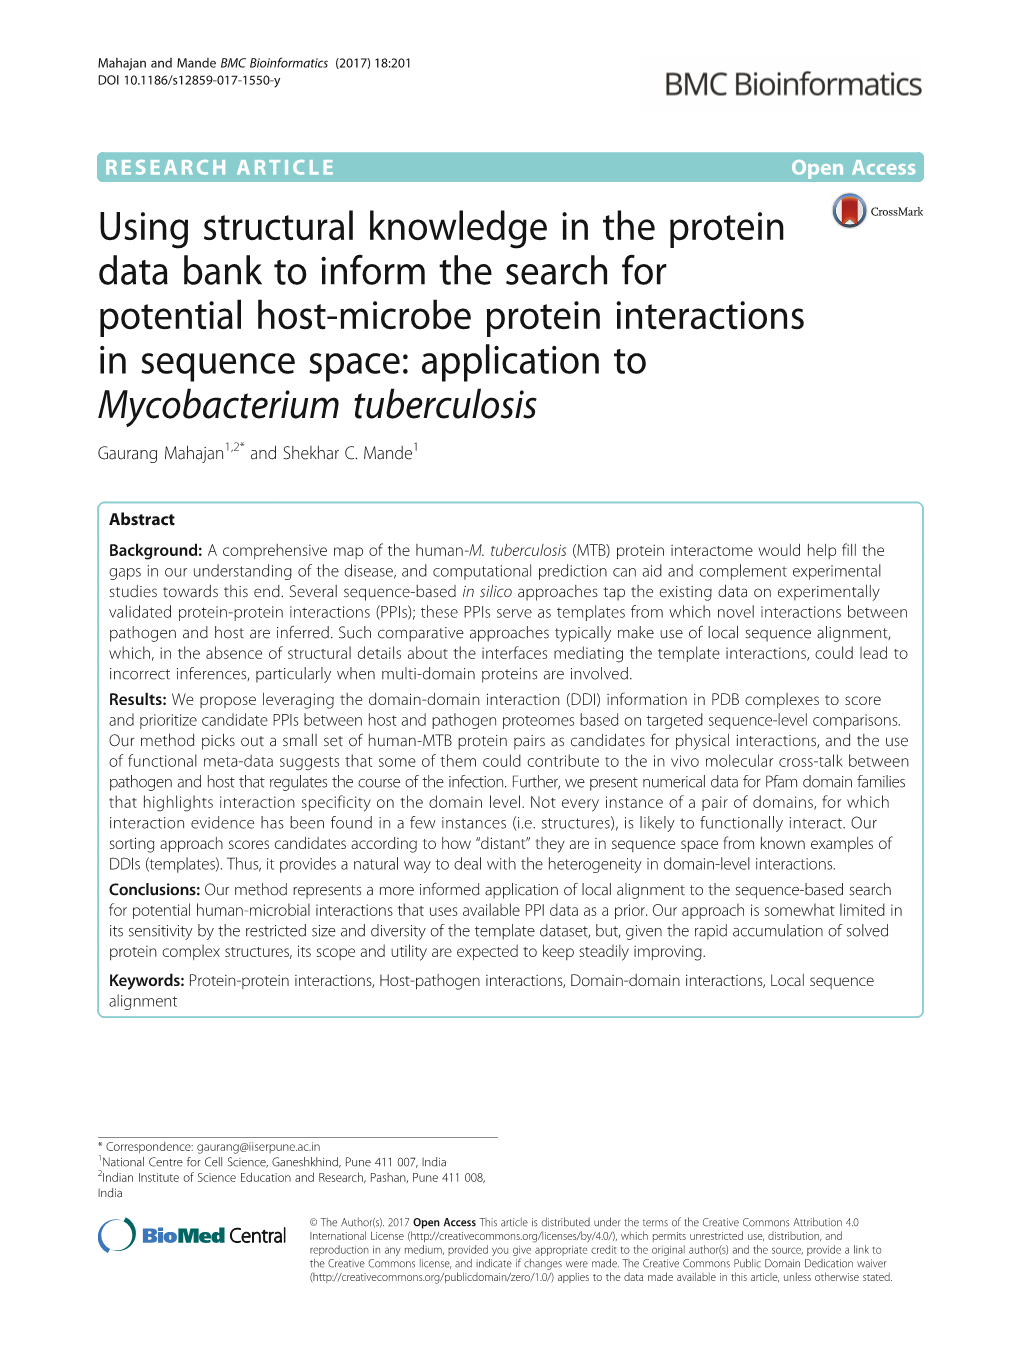 Using Structural Knowledge in the Protein Data Bank to Inform The